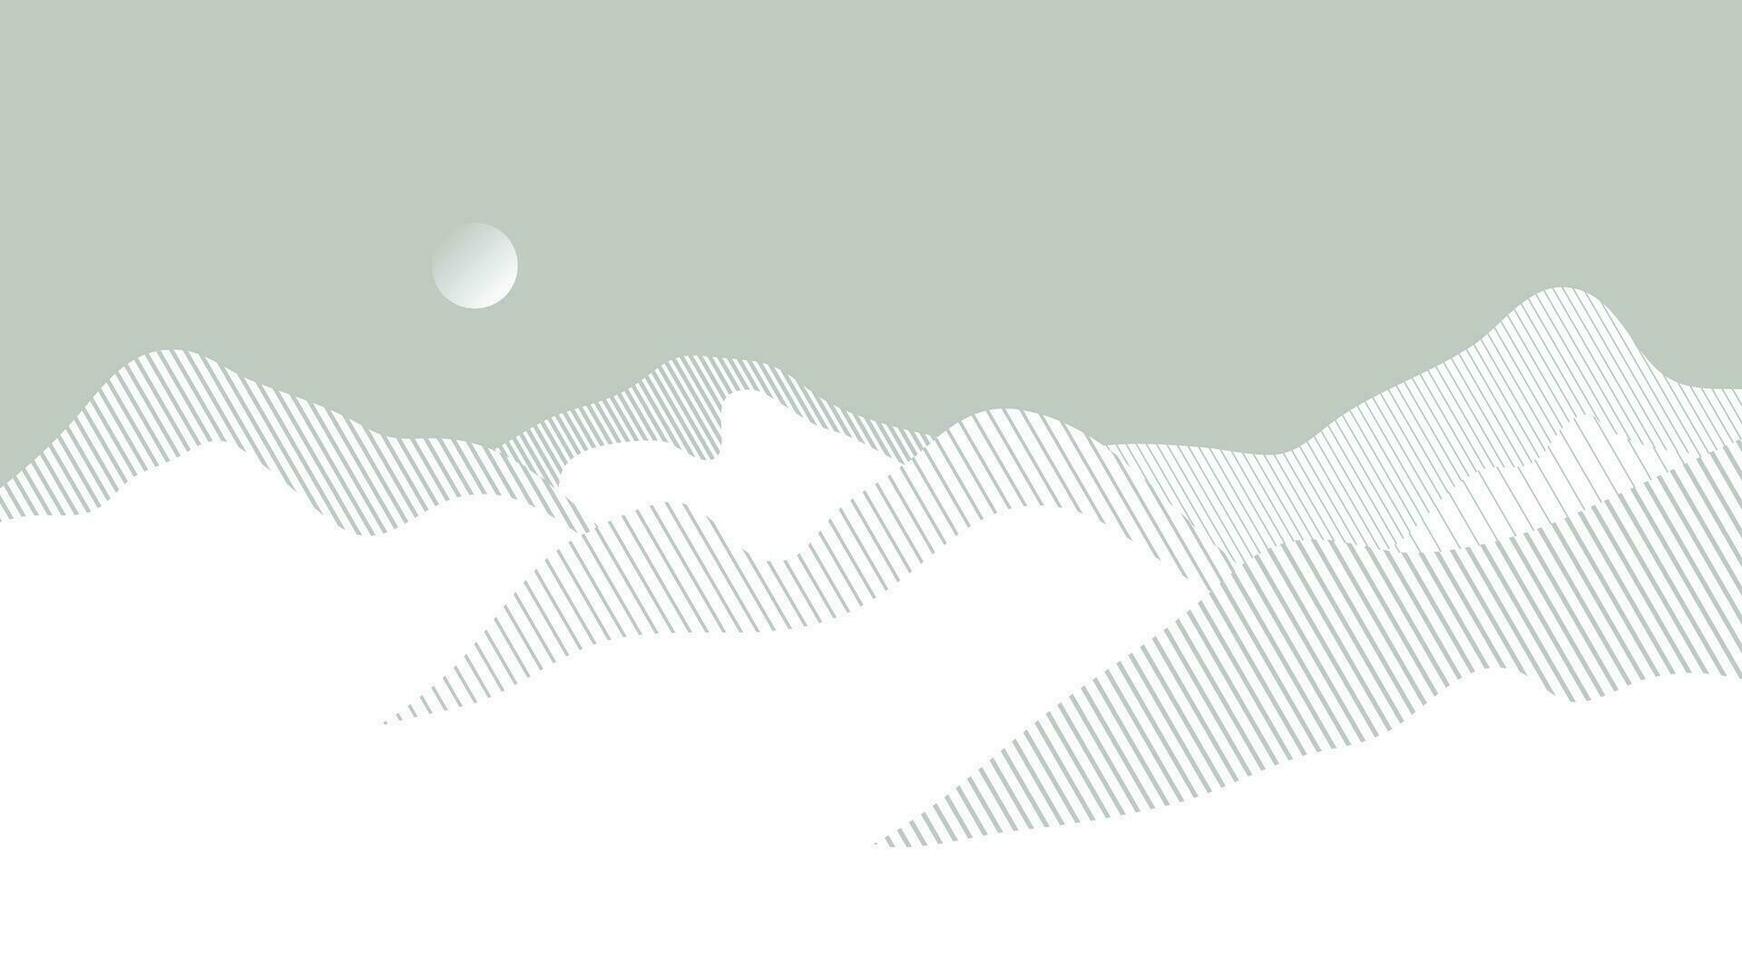 Abstract mountain background vector. Mountain landscape with line effect, halftone, line art texture, moon. color hills art wallpaper design for print, wall art, cover and interior. vector